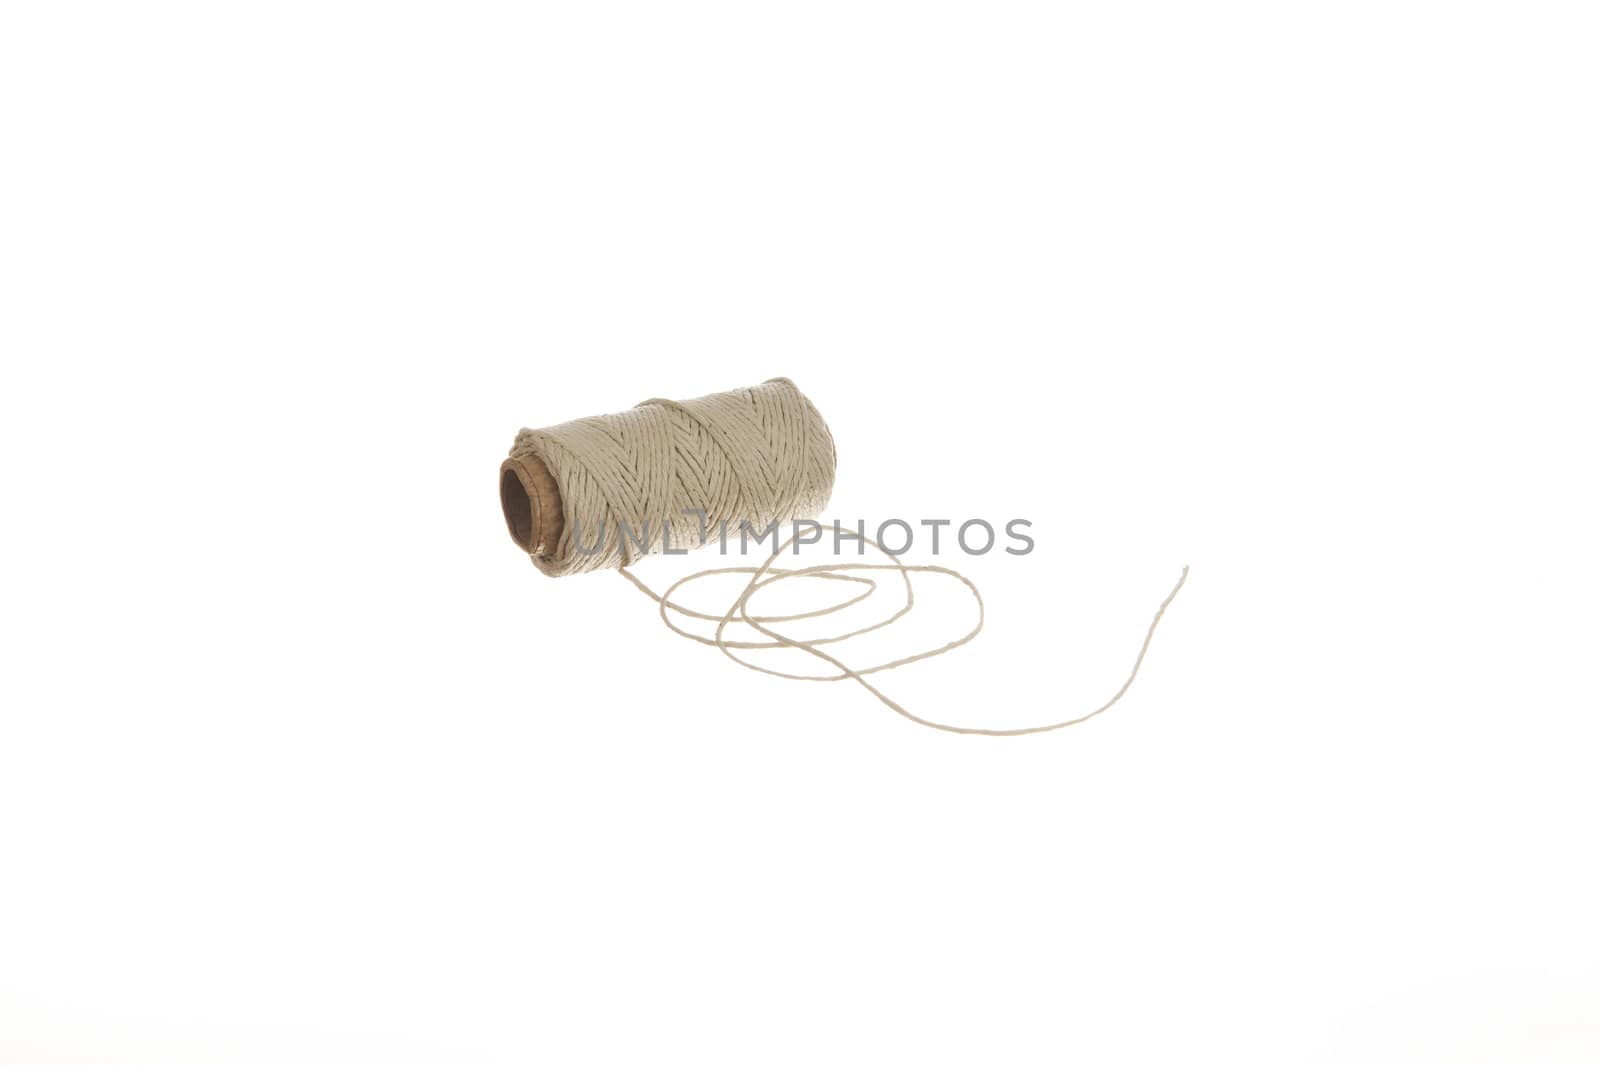 Natural hemp cord isolated on white background